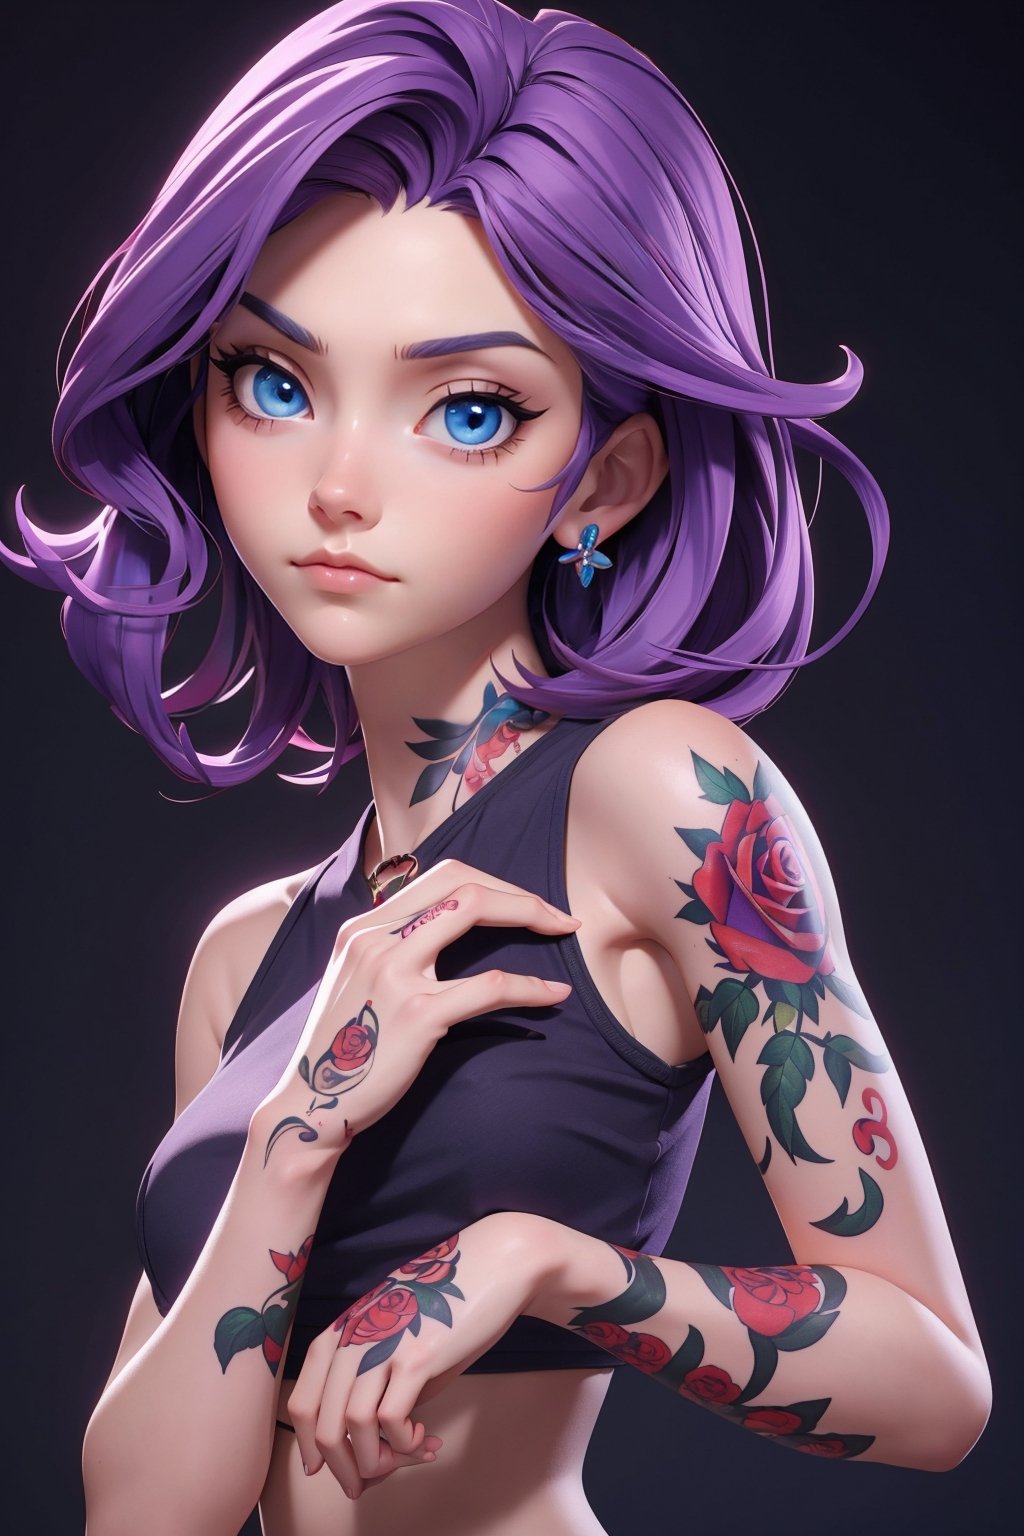 good hands, good body, 18 year old girl body,shoulder length semi wavy short straight purple hair,a red rose tattoo on the neck,letter tattoos on the fingers of the hand,3DMM